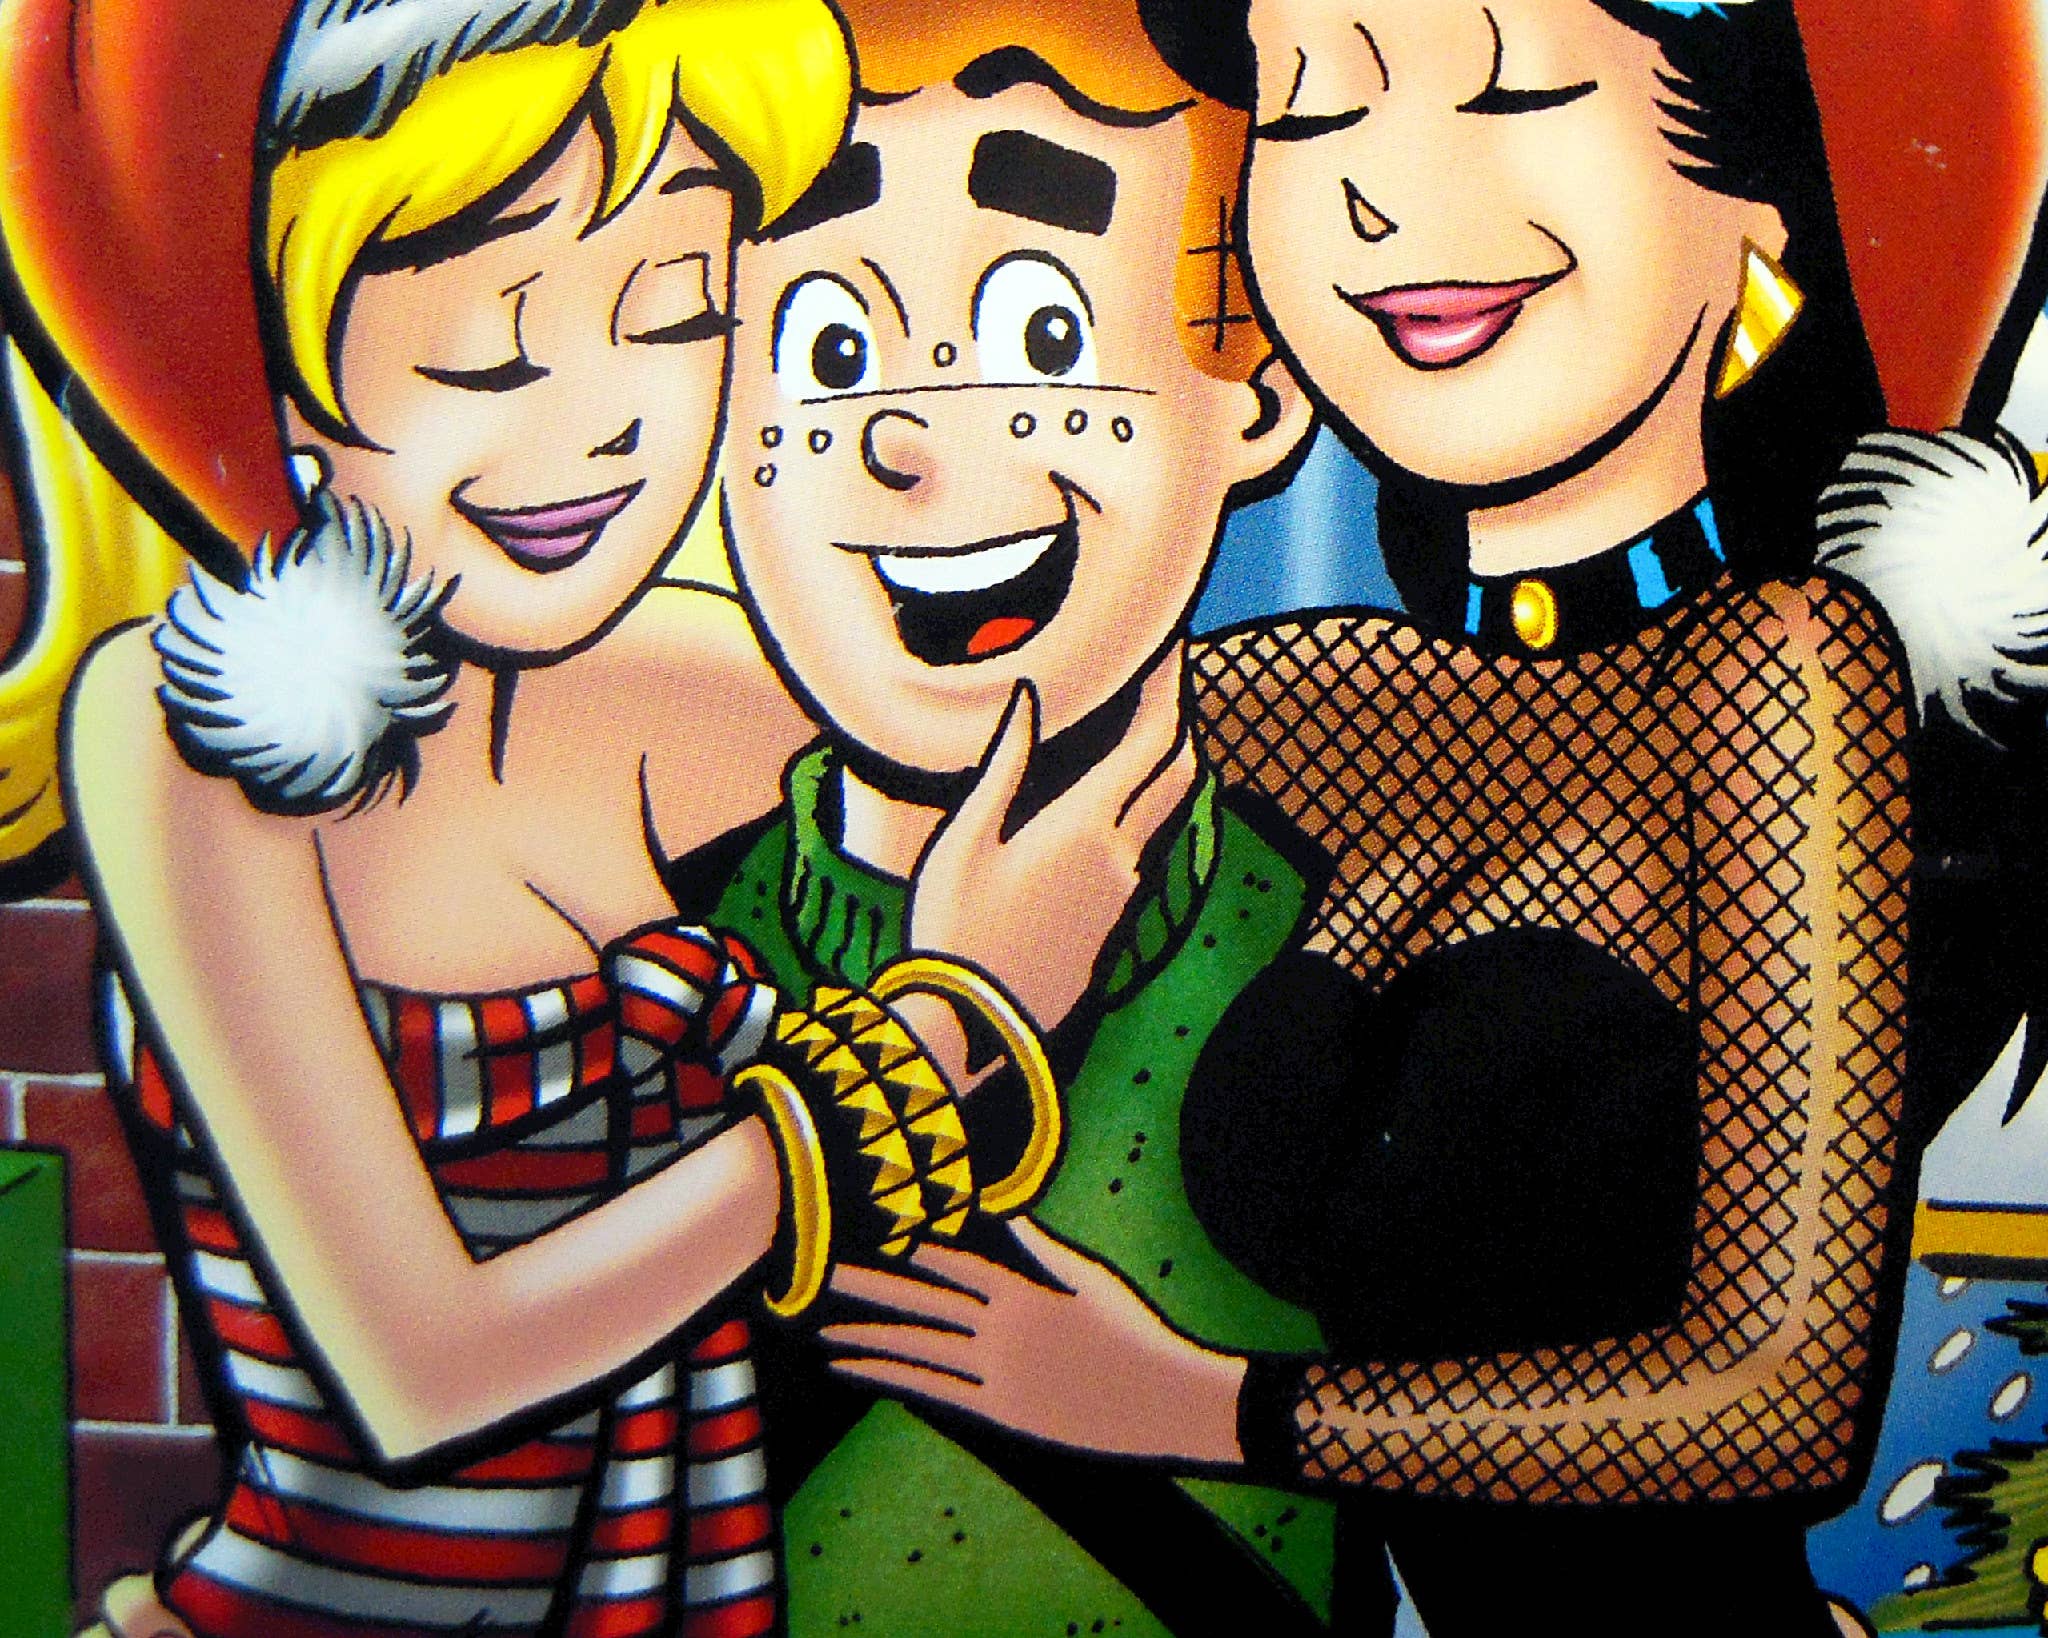 The CW Ordered a Pilot Based on the Archie Comics